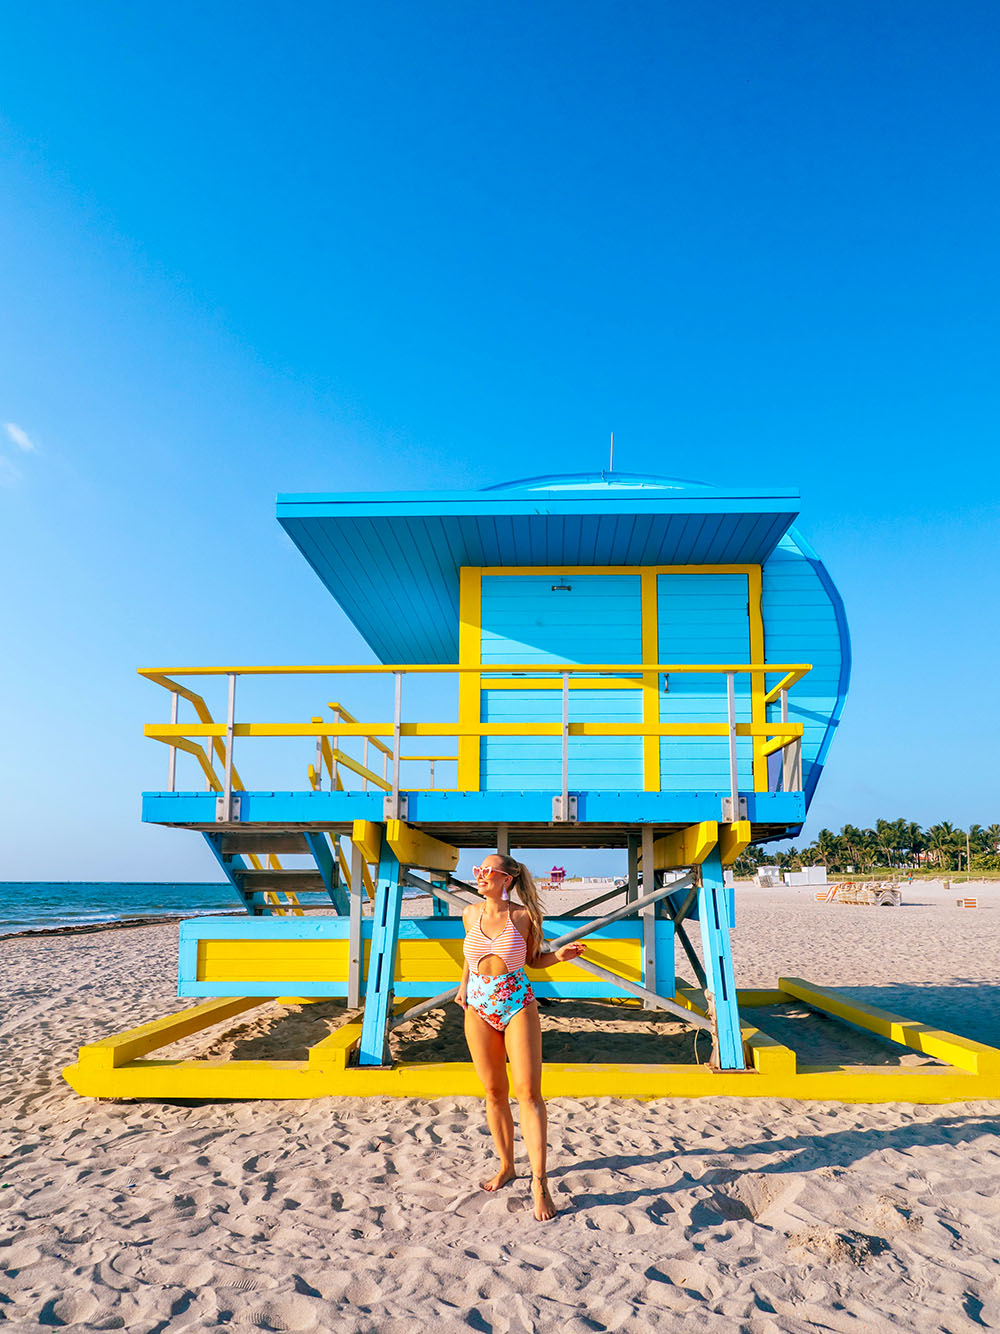 So you've planned a wonderful 3 day trip to Miami and now you're looking for the perfect itinerary for your visit… well, this guide is for you! I’ve put together the ultimate 3 days in Miami itinerary that will have you seeing and experiencing all of Miami’s top sights and attractions. From South Beach & Ocean Drive to Little Havana & Wynwood, you don’t want to miss this guide to the perfect long weekend in Miami. Pictured here: South Pointe Beach